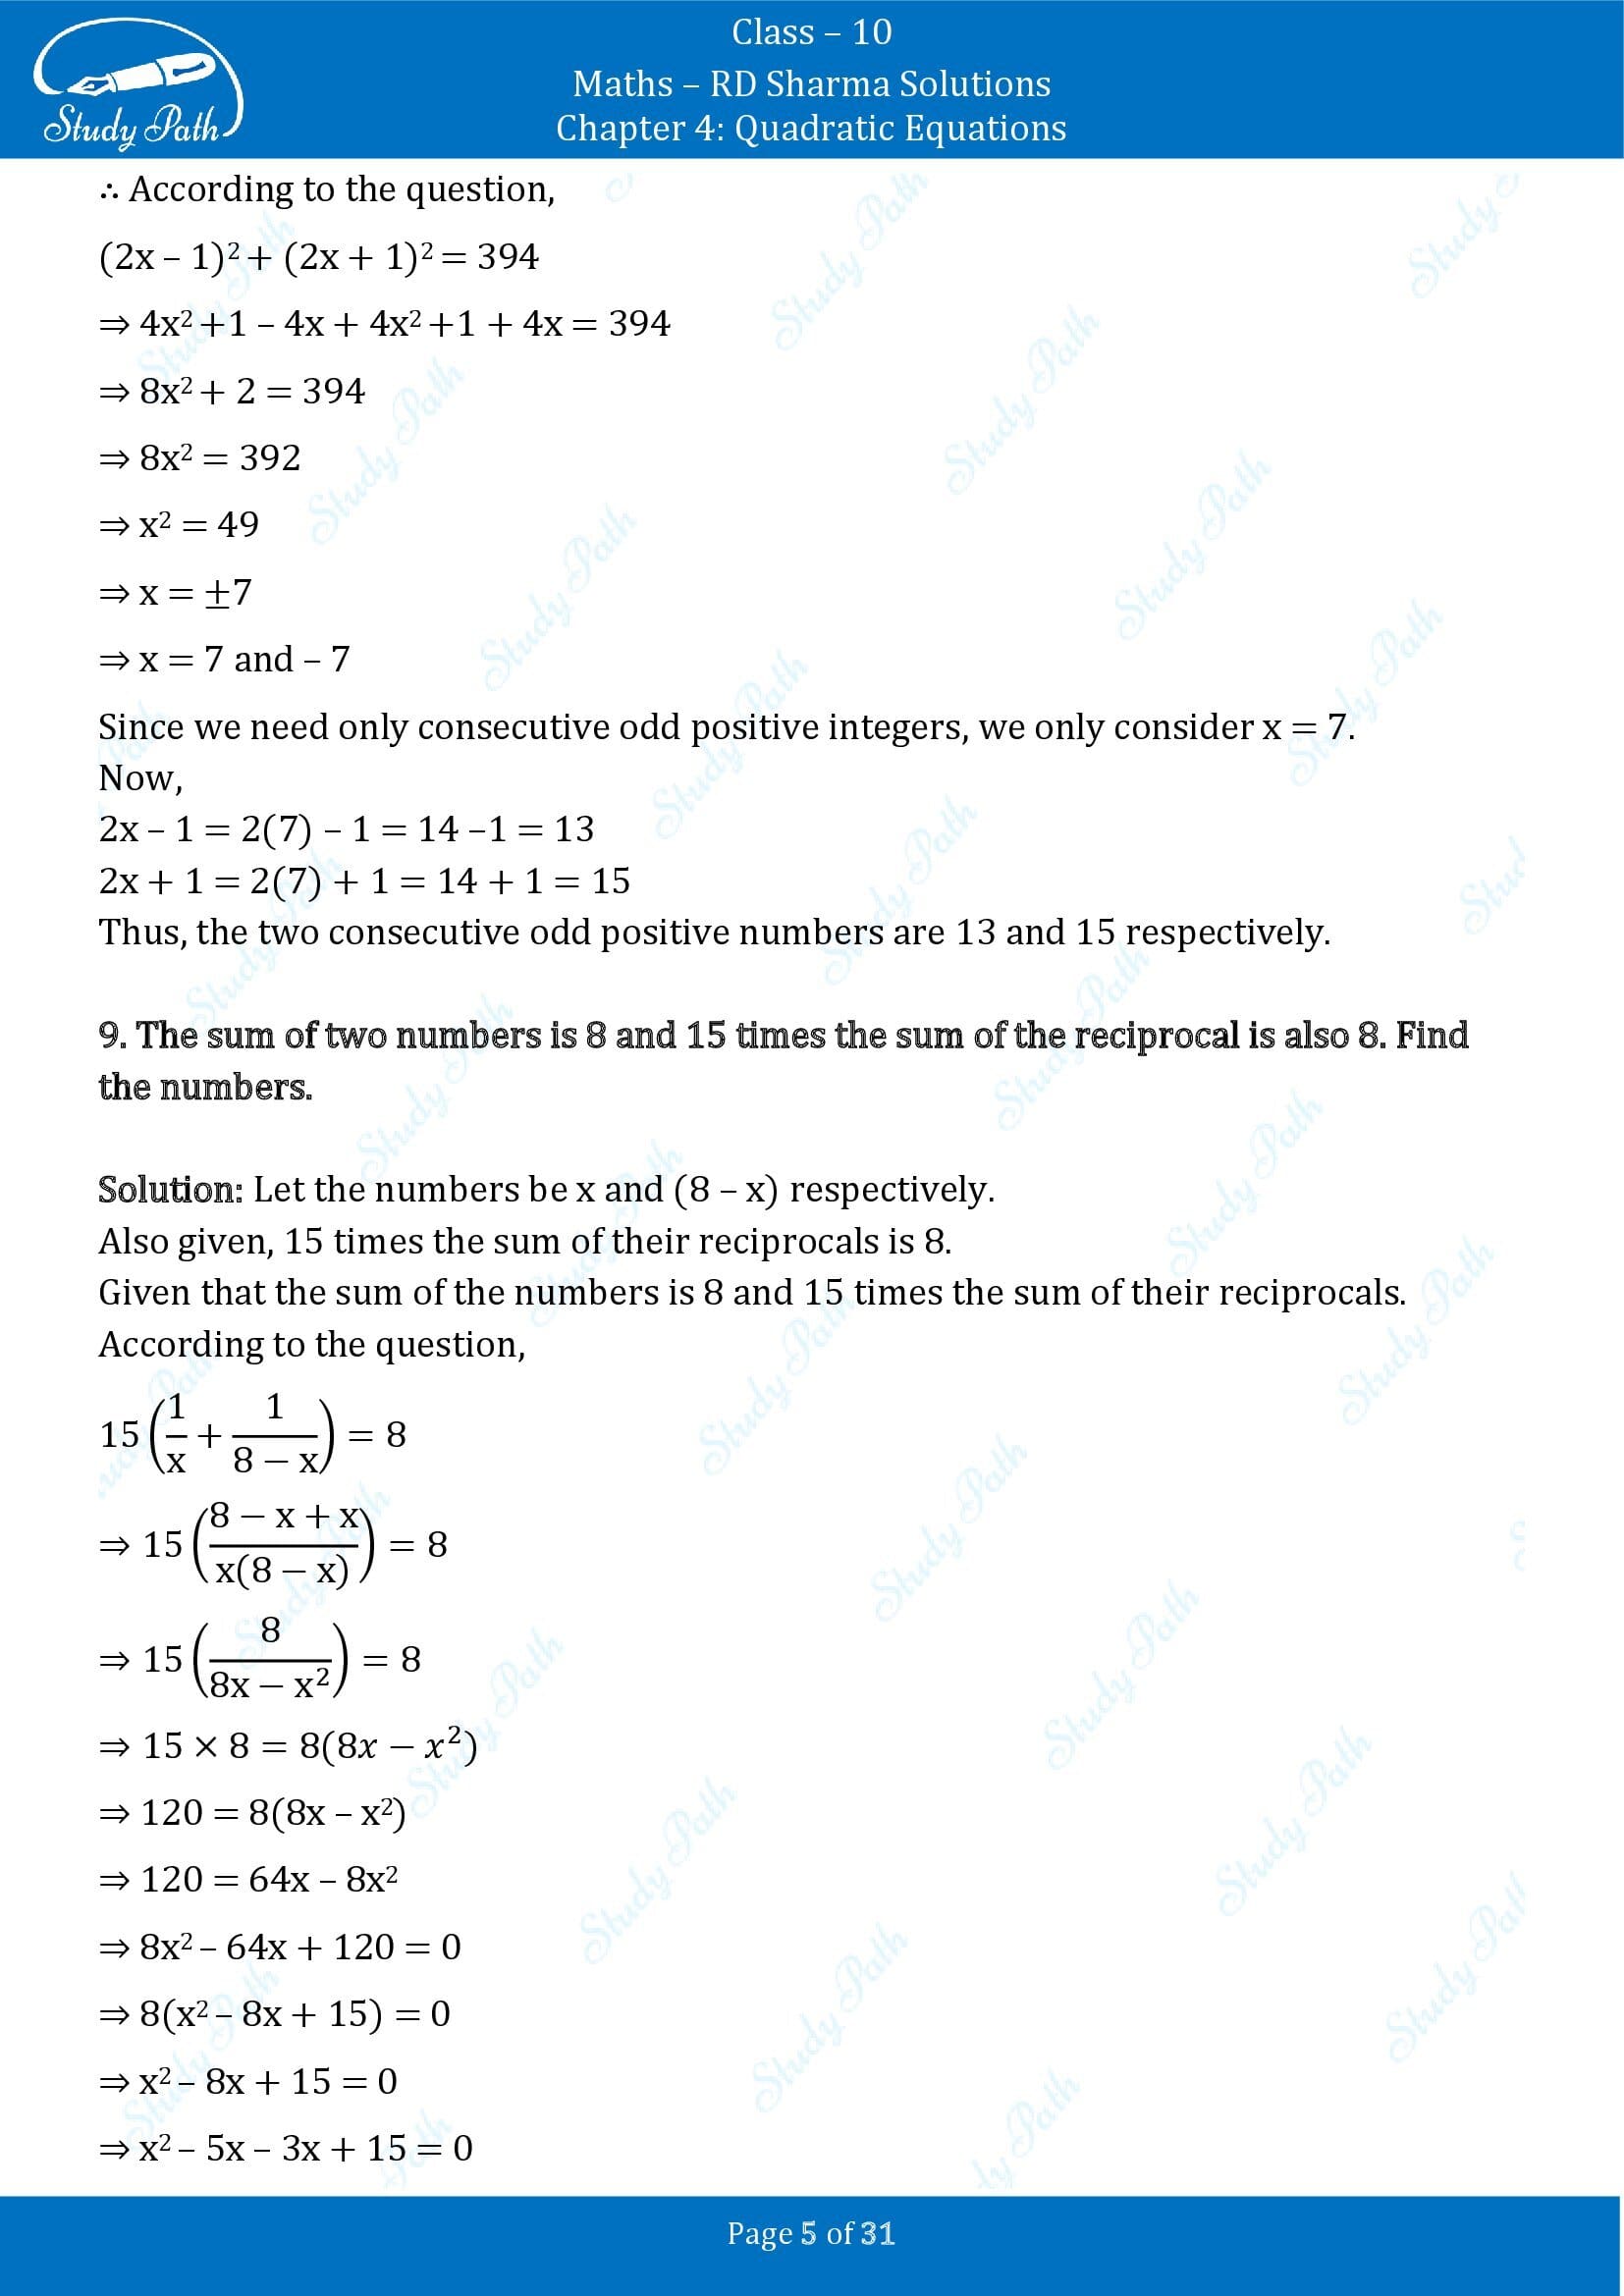 RD Sharma Solutions Class 10 Chapter 4 Quadratic Equations Exercise 4.7 00005